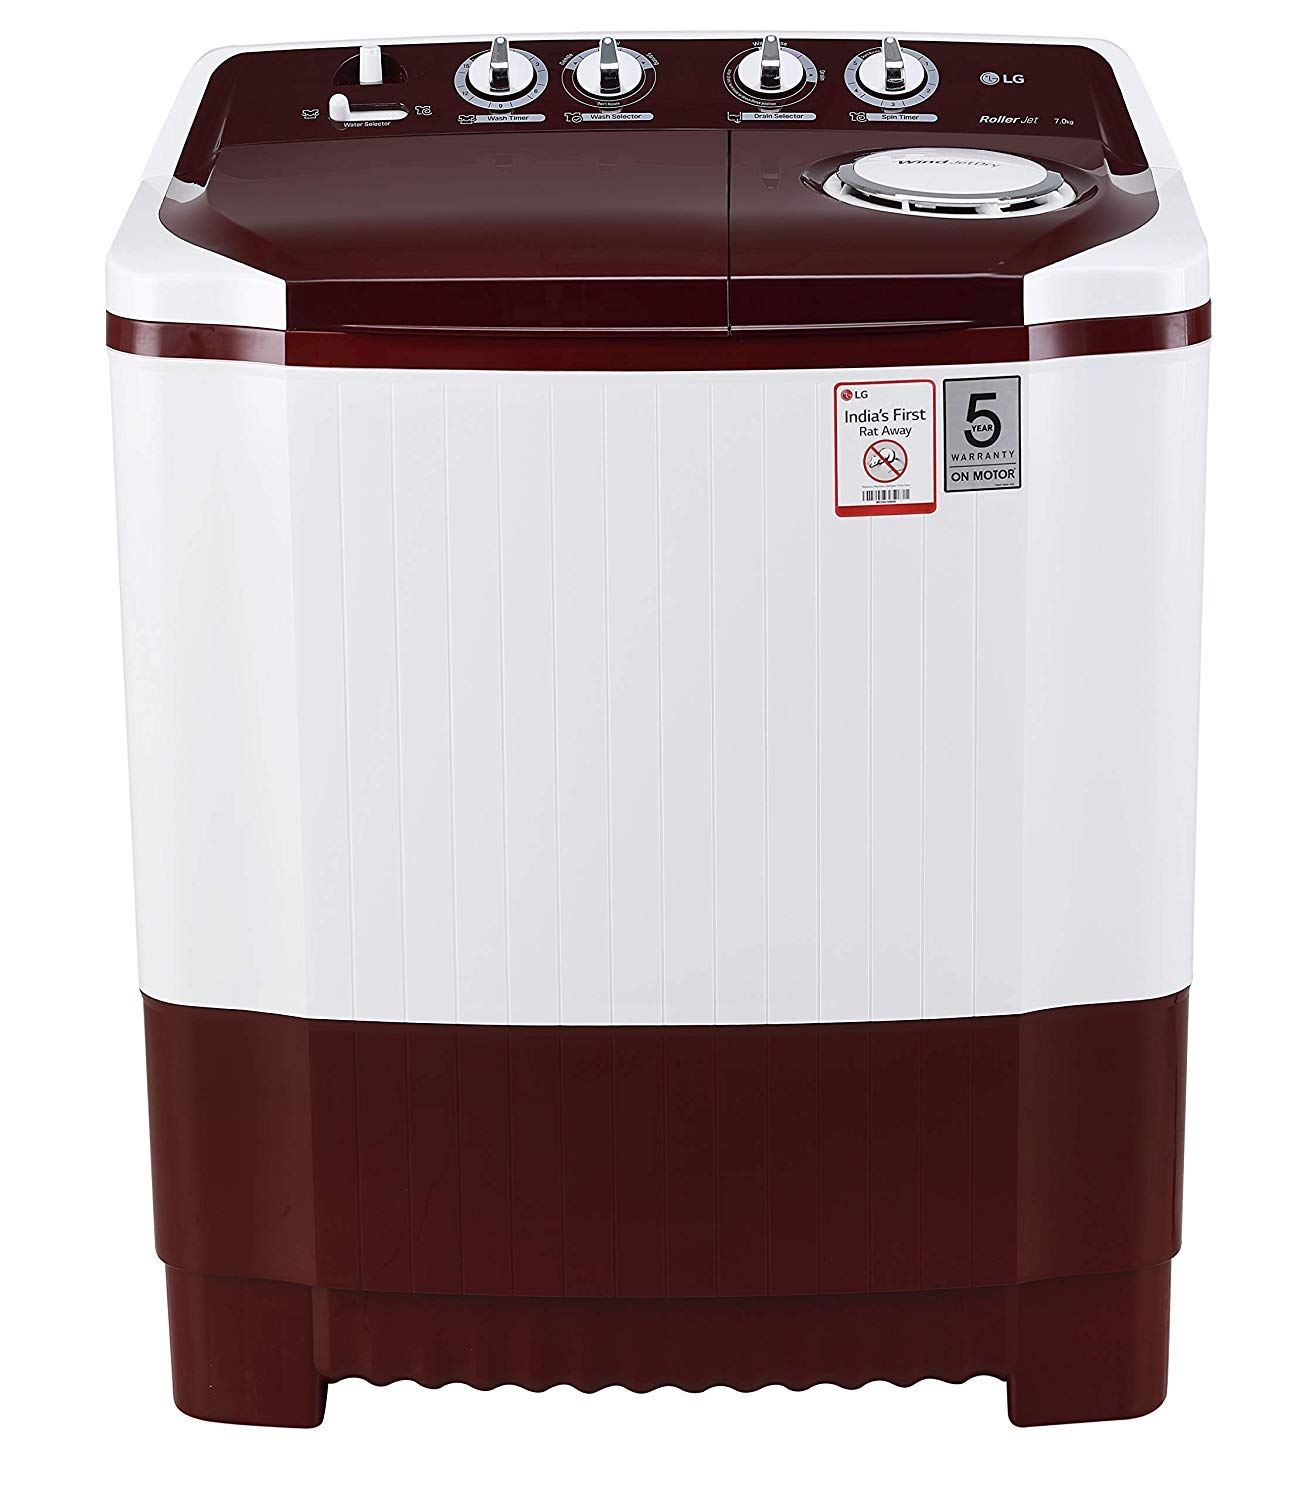 Best Semi-Automatic Washing Machines in India